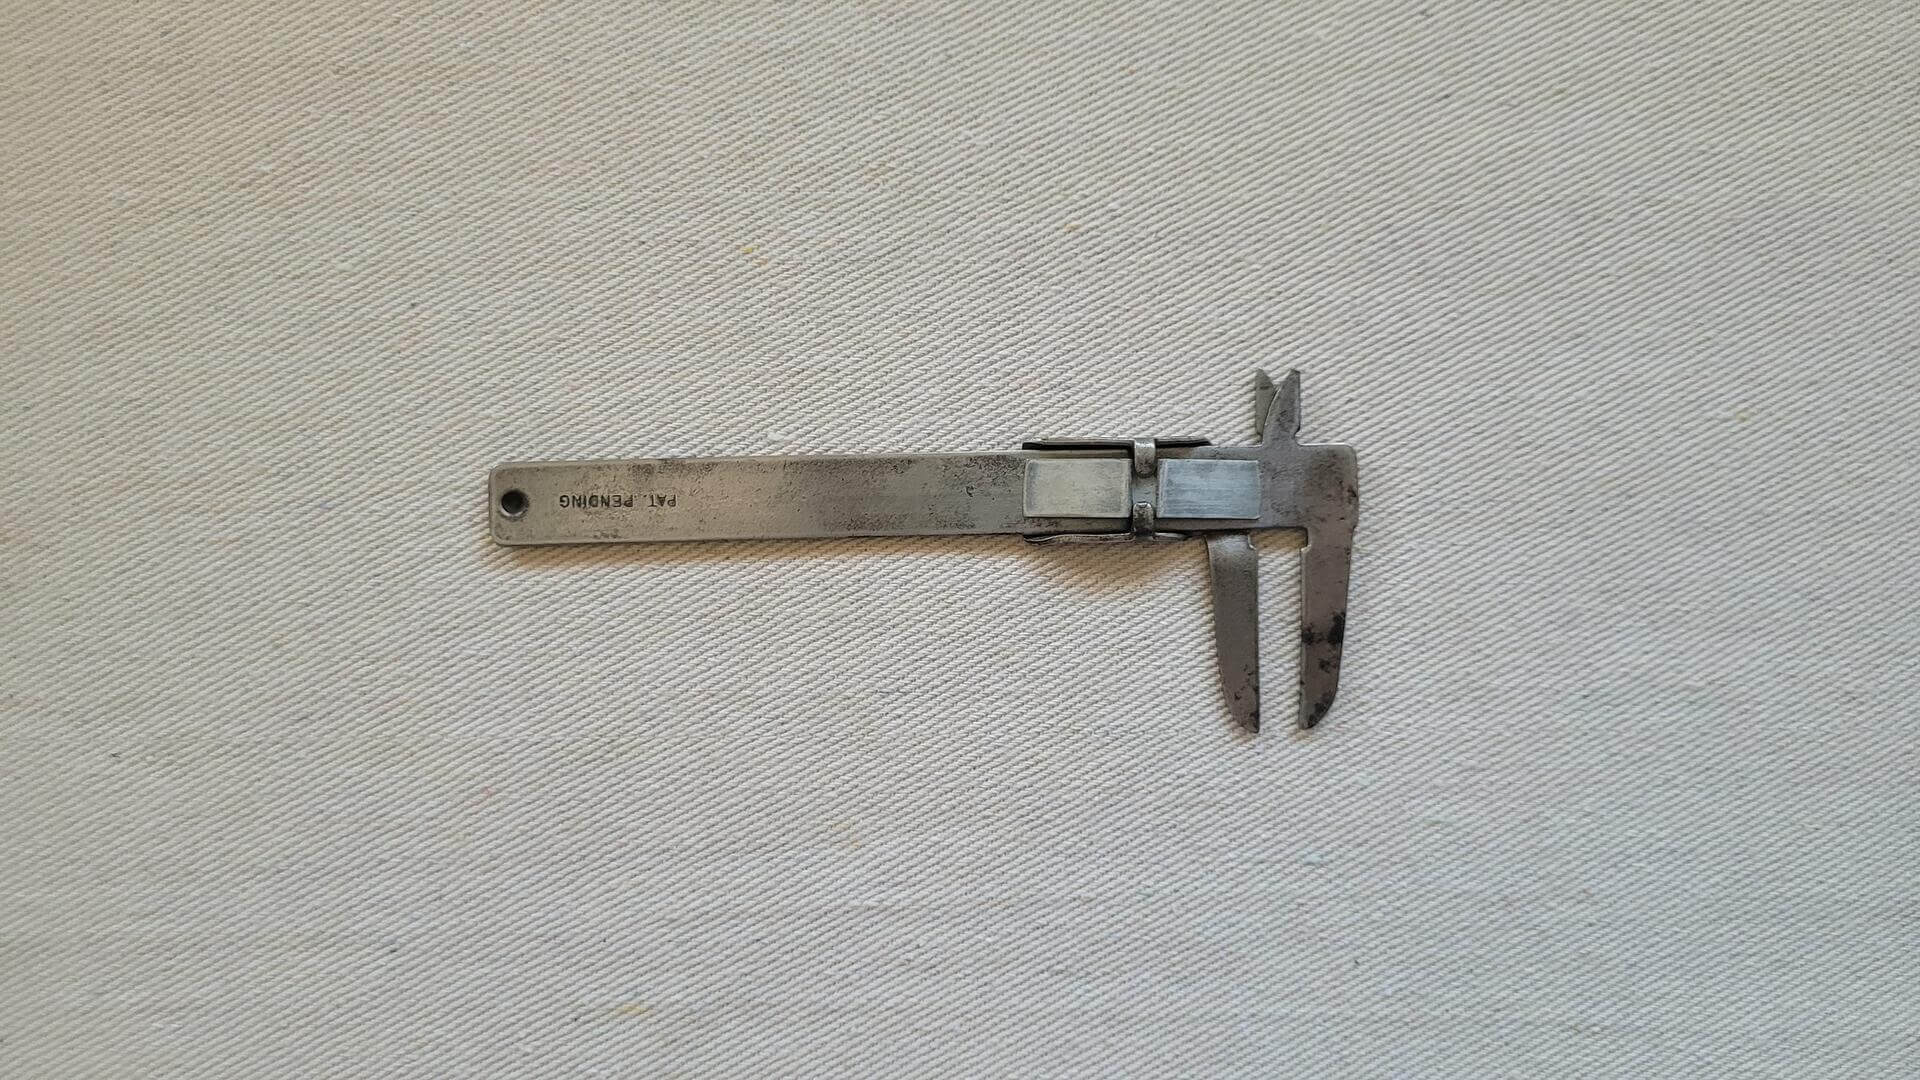 Pocket vernier caliper with imperial and metric scale. Vintage made in USA collectible marking and measuring machinist hand tools